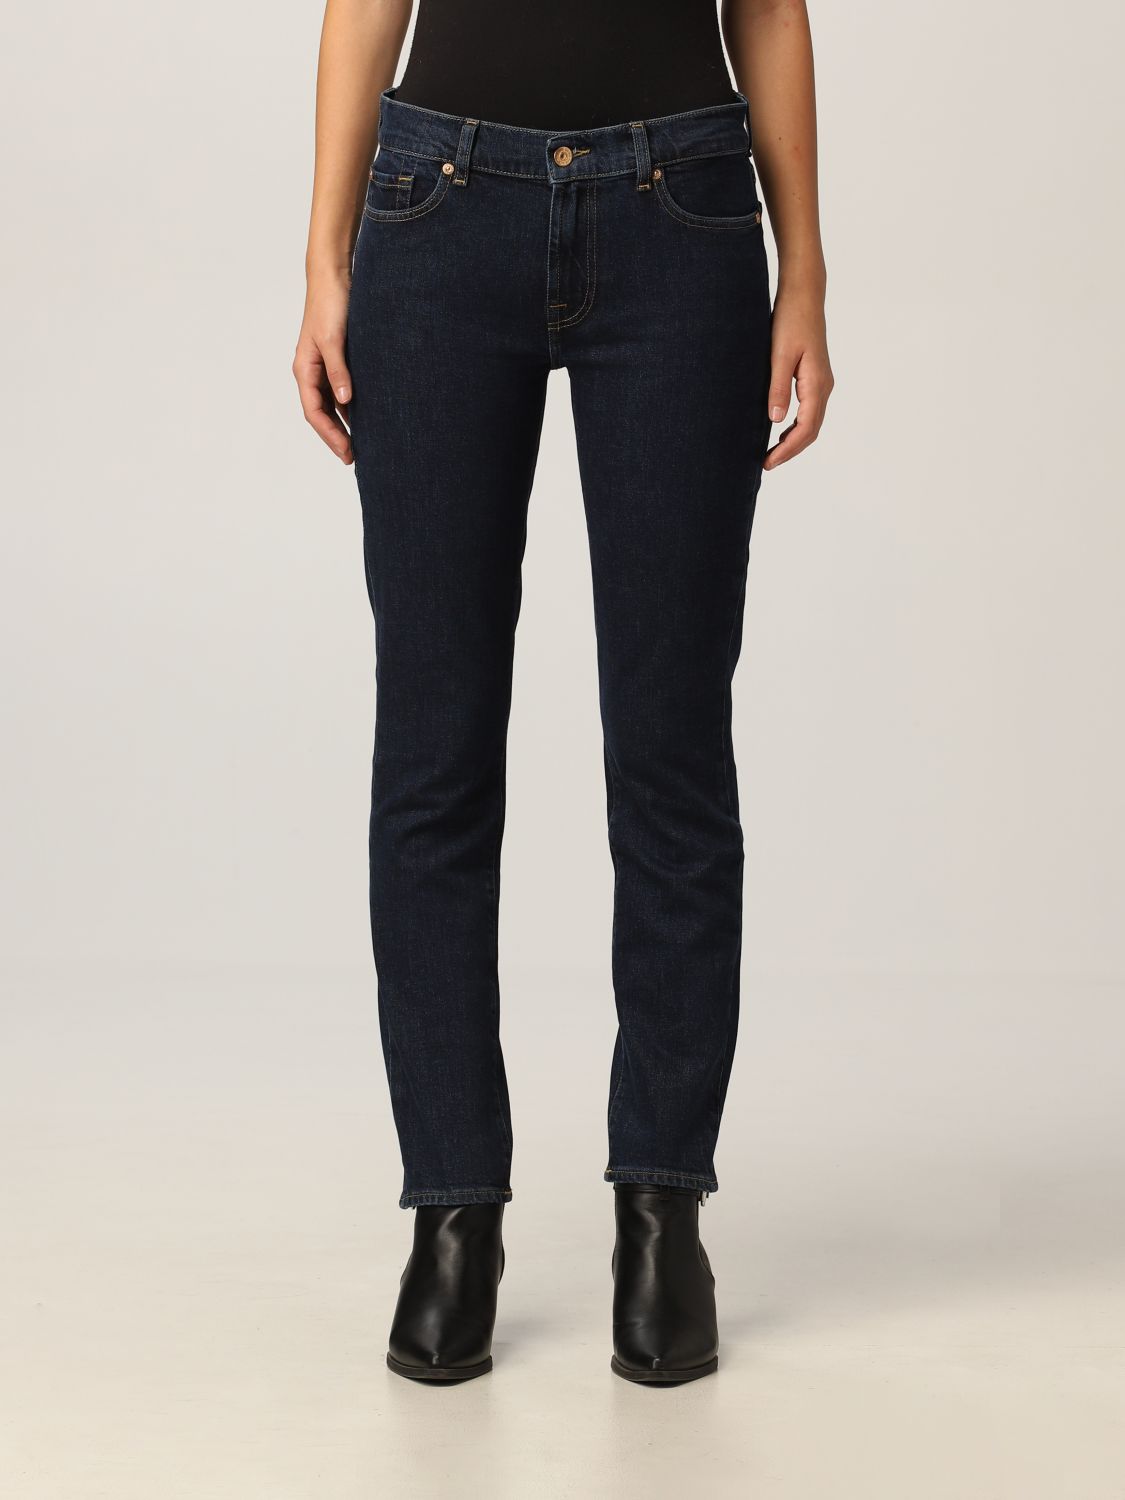 Jeans 7 For All Mankind: 7 For All Mankind Damen jeans blau 1